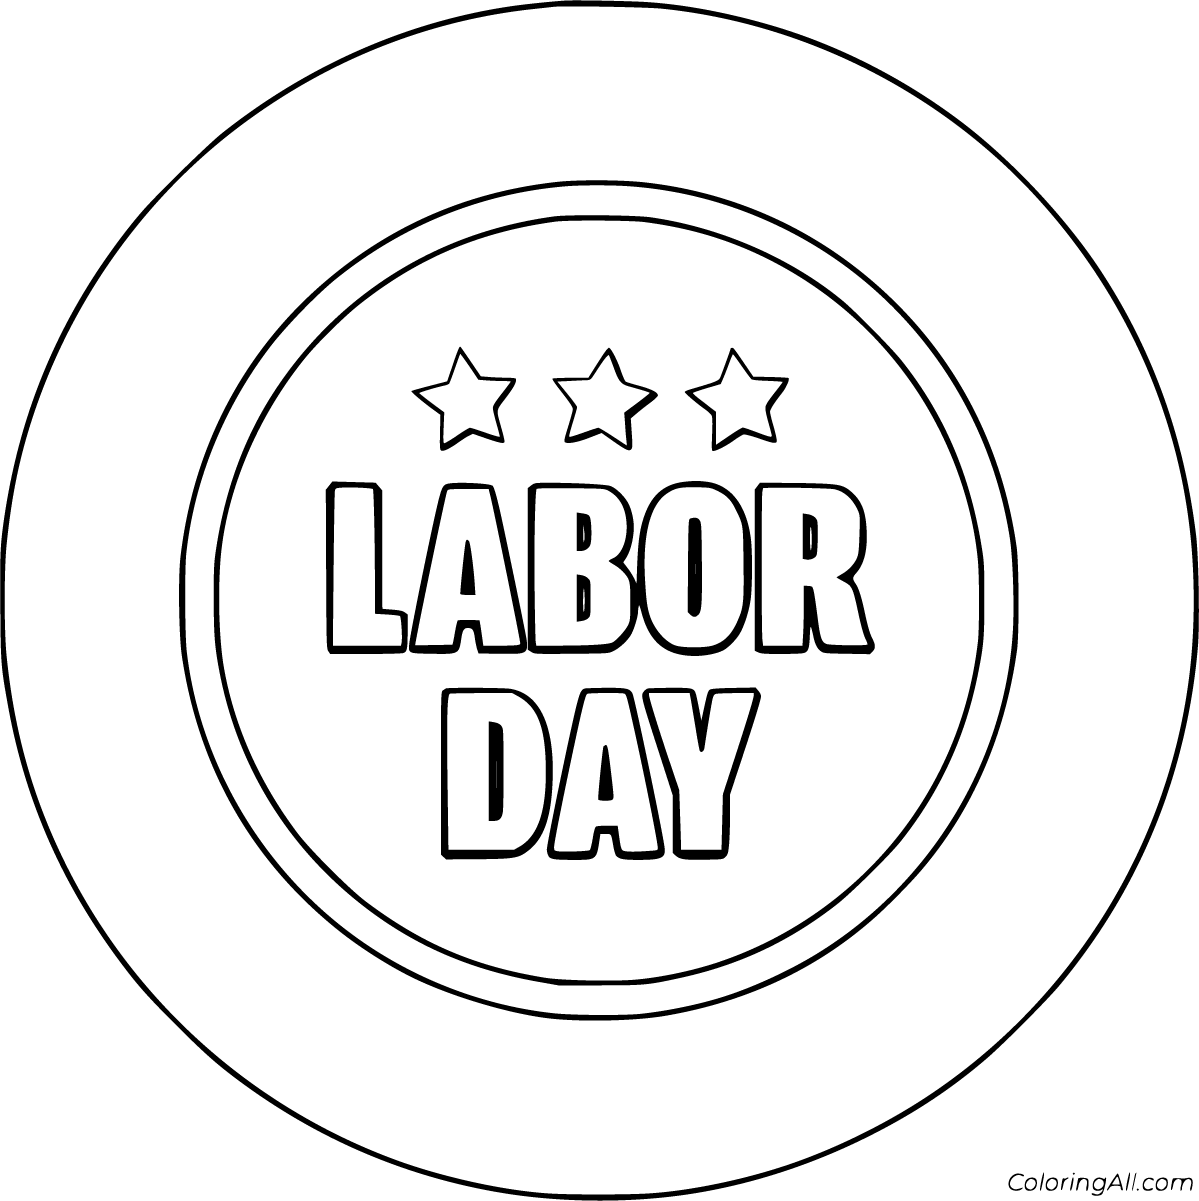 labor-day-what-you-need-to-know-free-worksheet-labor-day-history